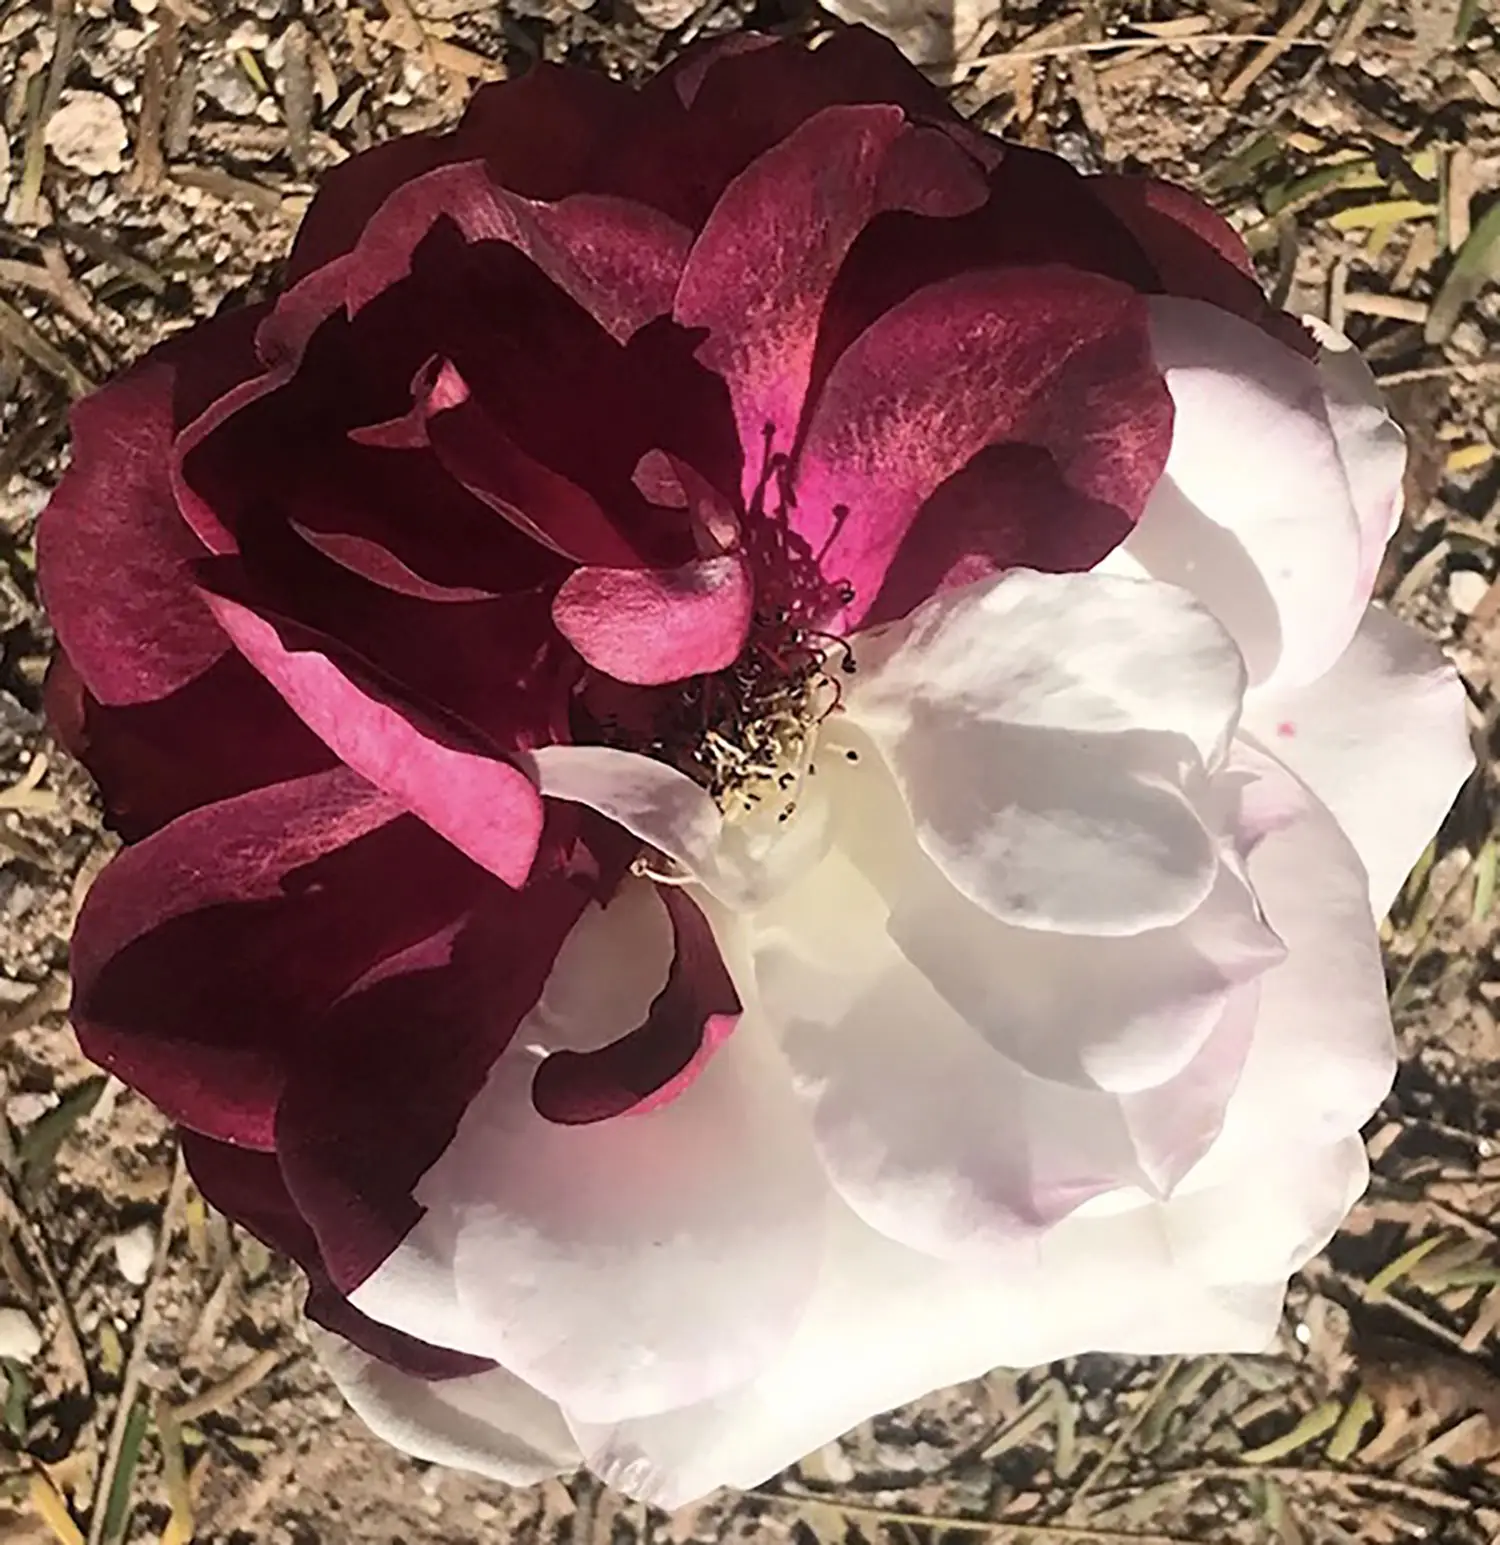 A chimeric rose appears perfectly split where one side is a pristine white and the other is a deep magenta.